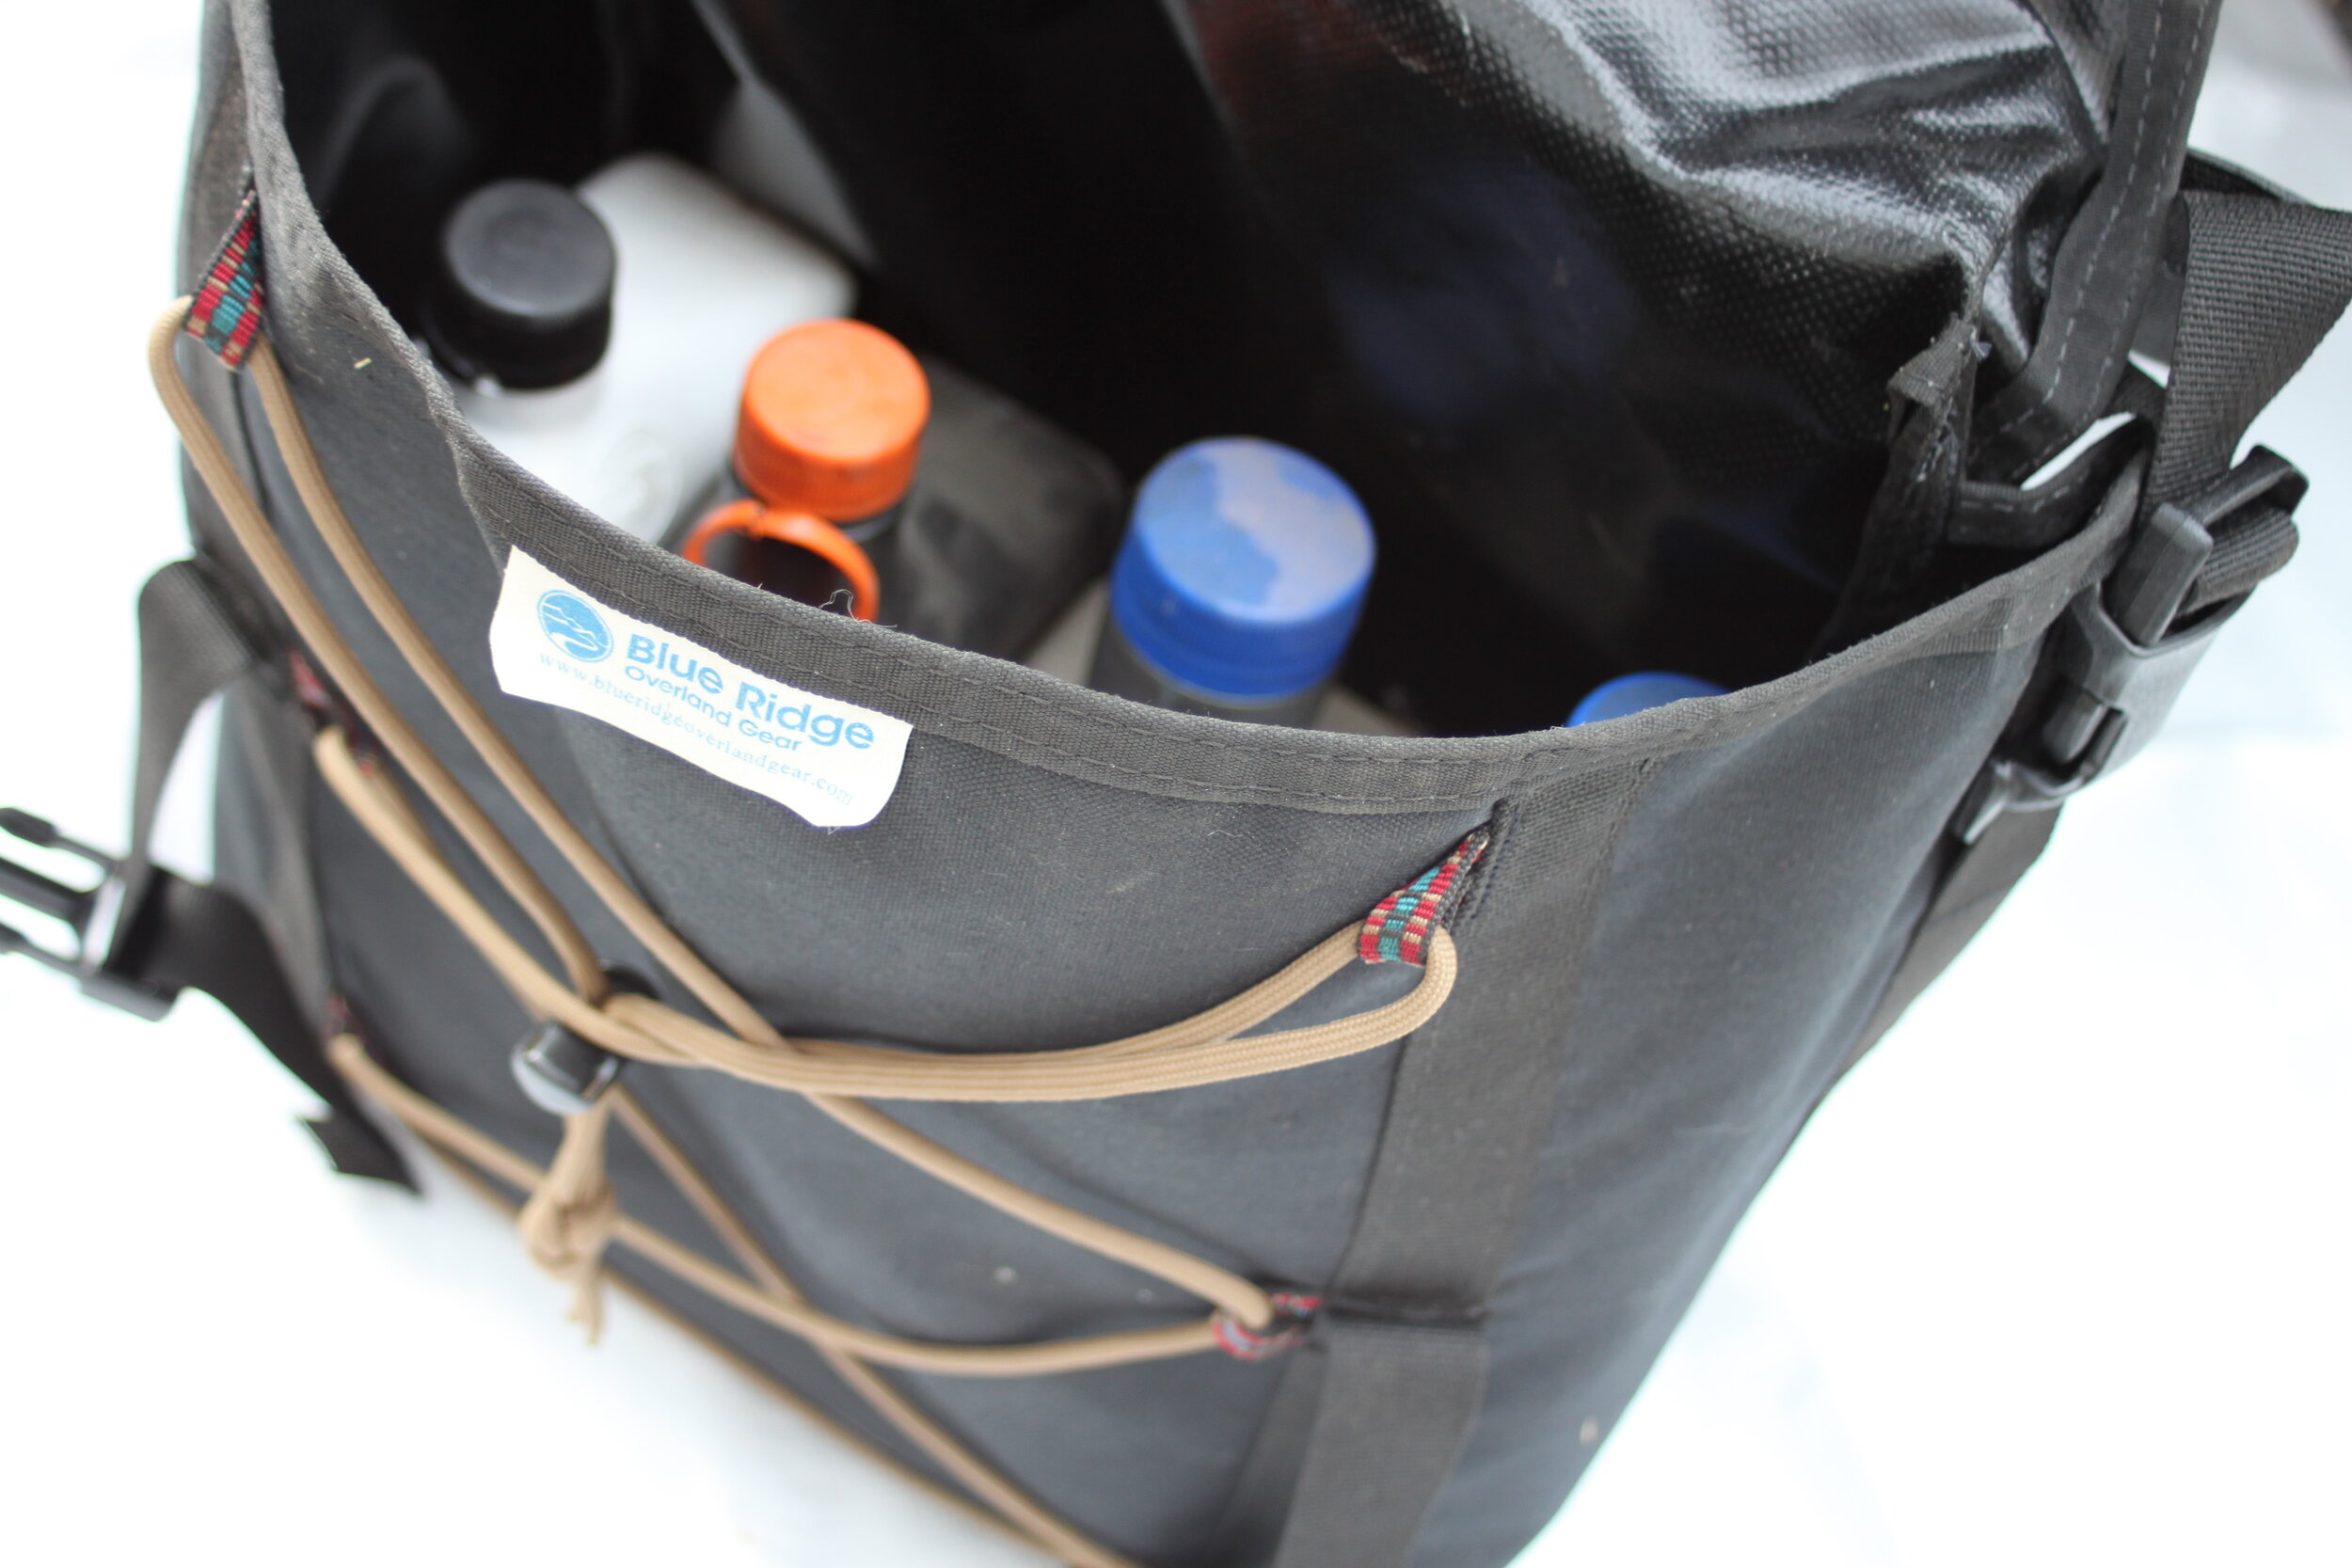 a review: the overland oil bag @broverland #edc #offroad #storage